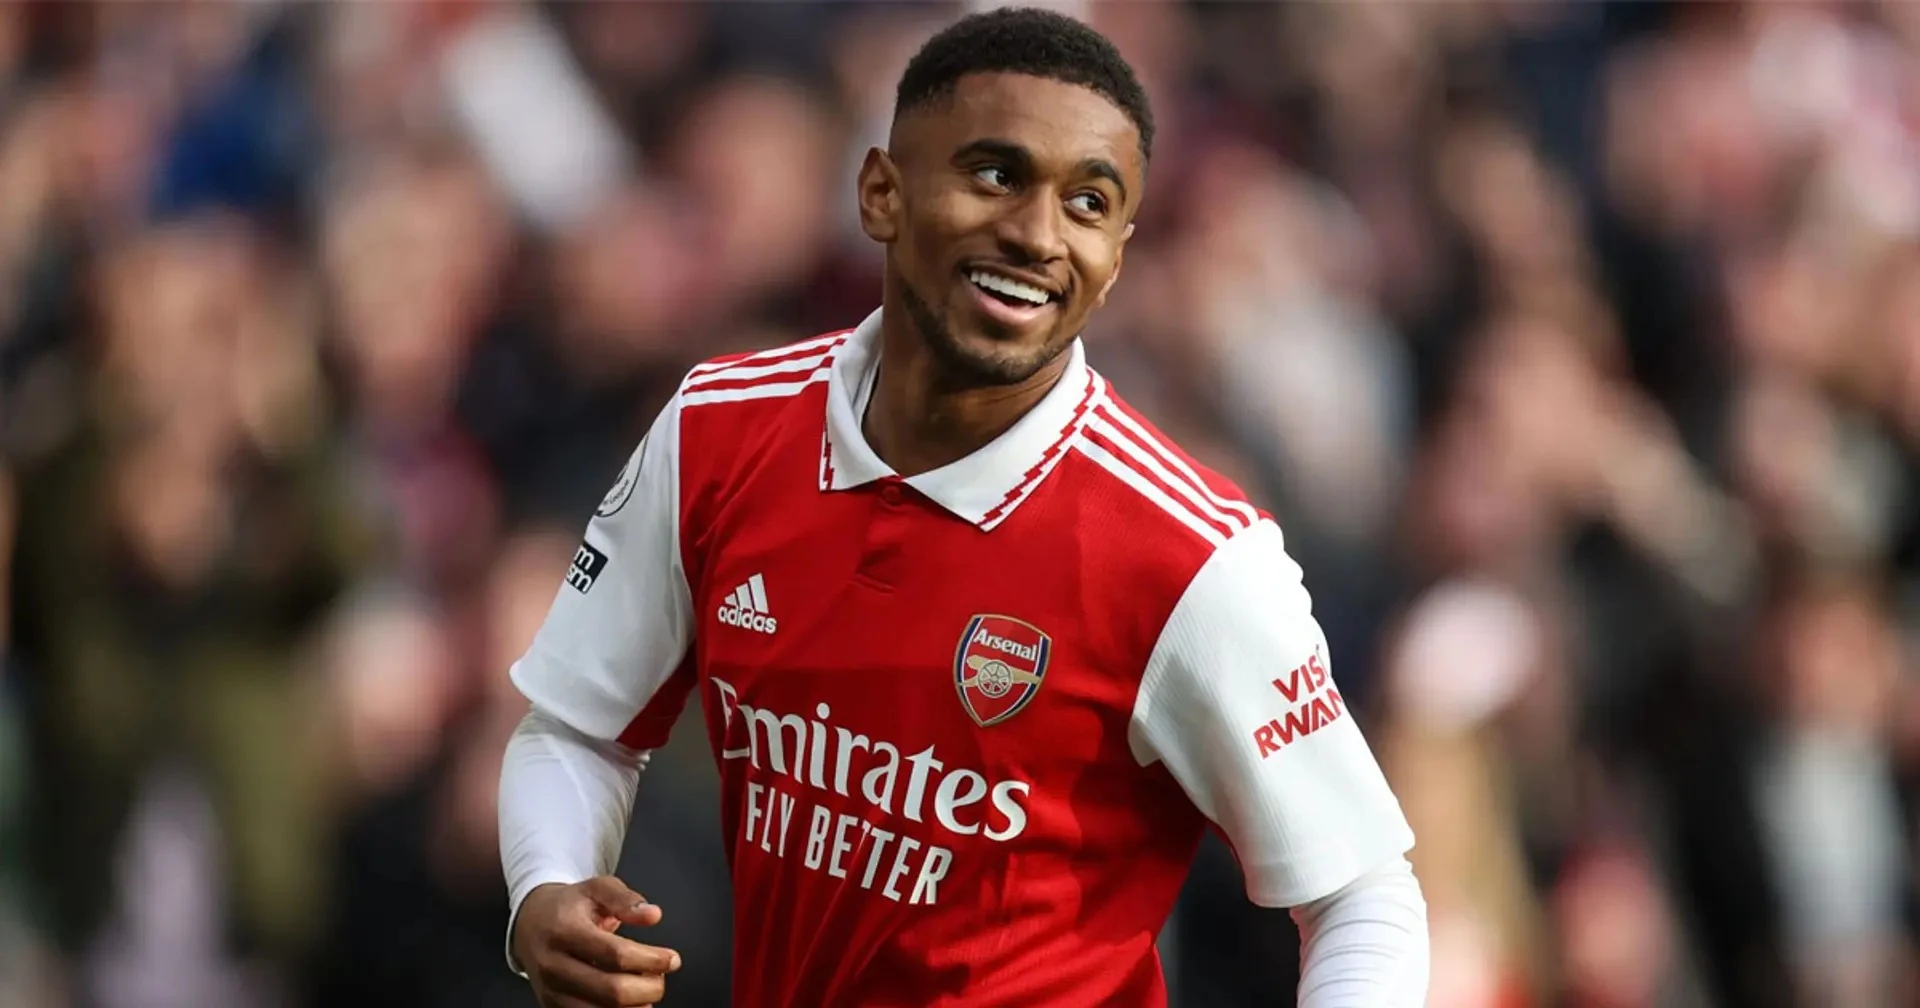 David Ornstein gives key update on Nelson's future at Arsenal - his contract expires in 2023